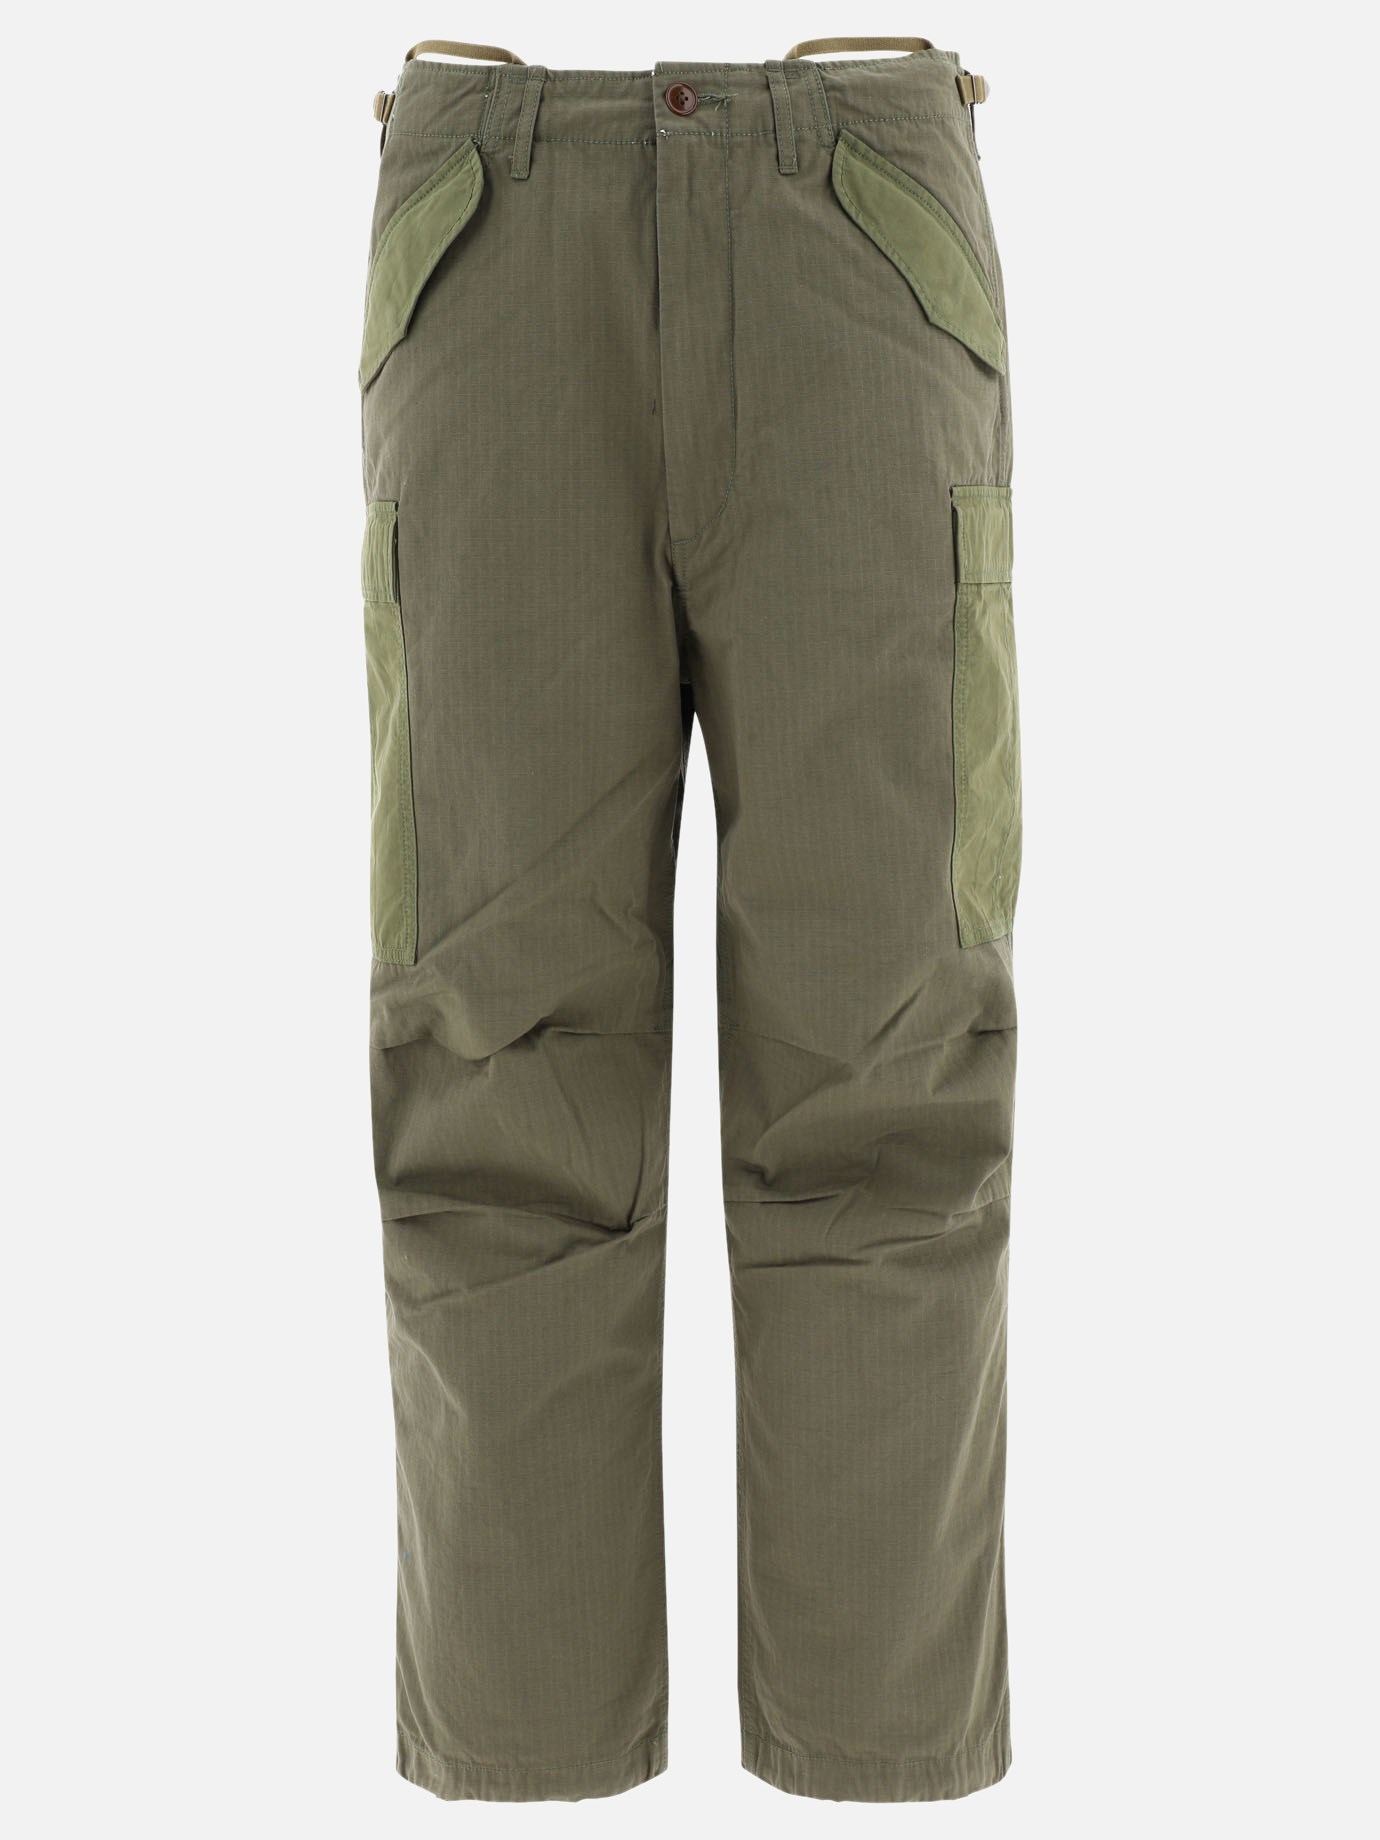 Cargo trousers with drawstringby Nanamica - 2